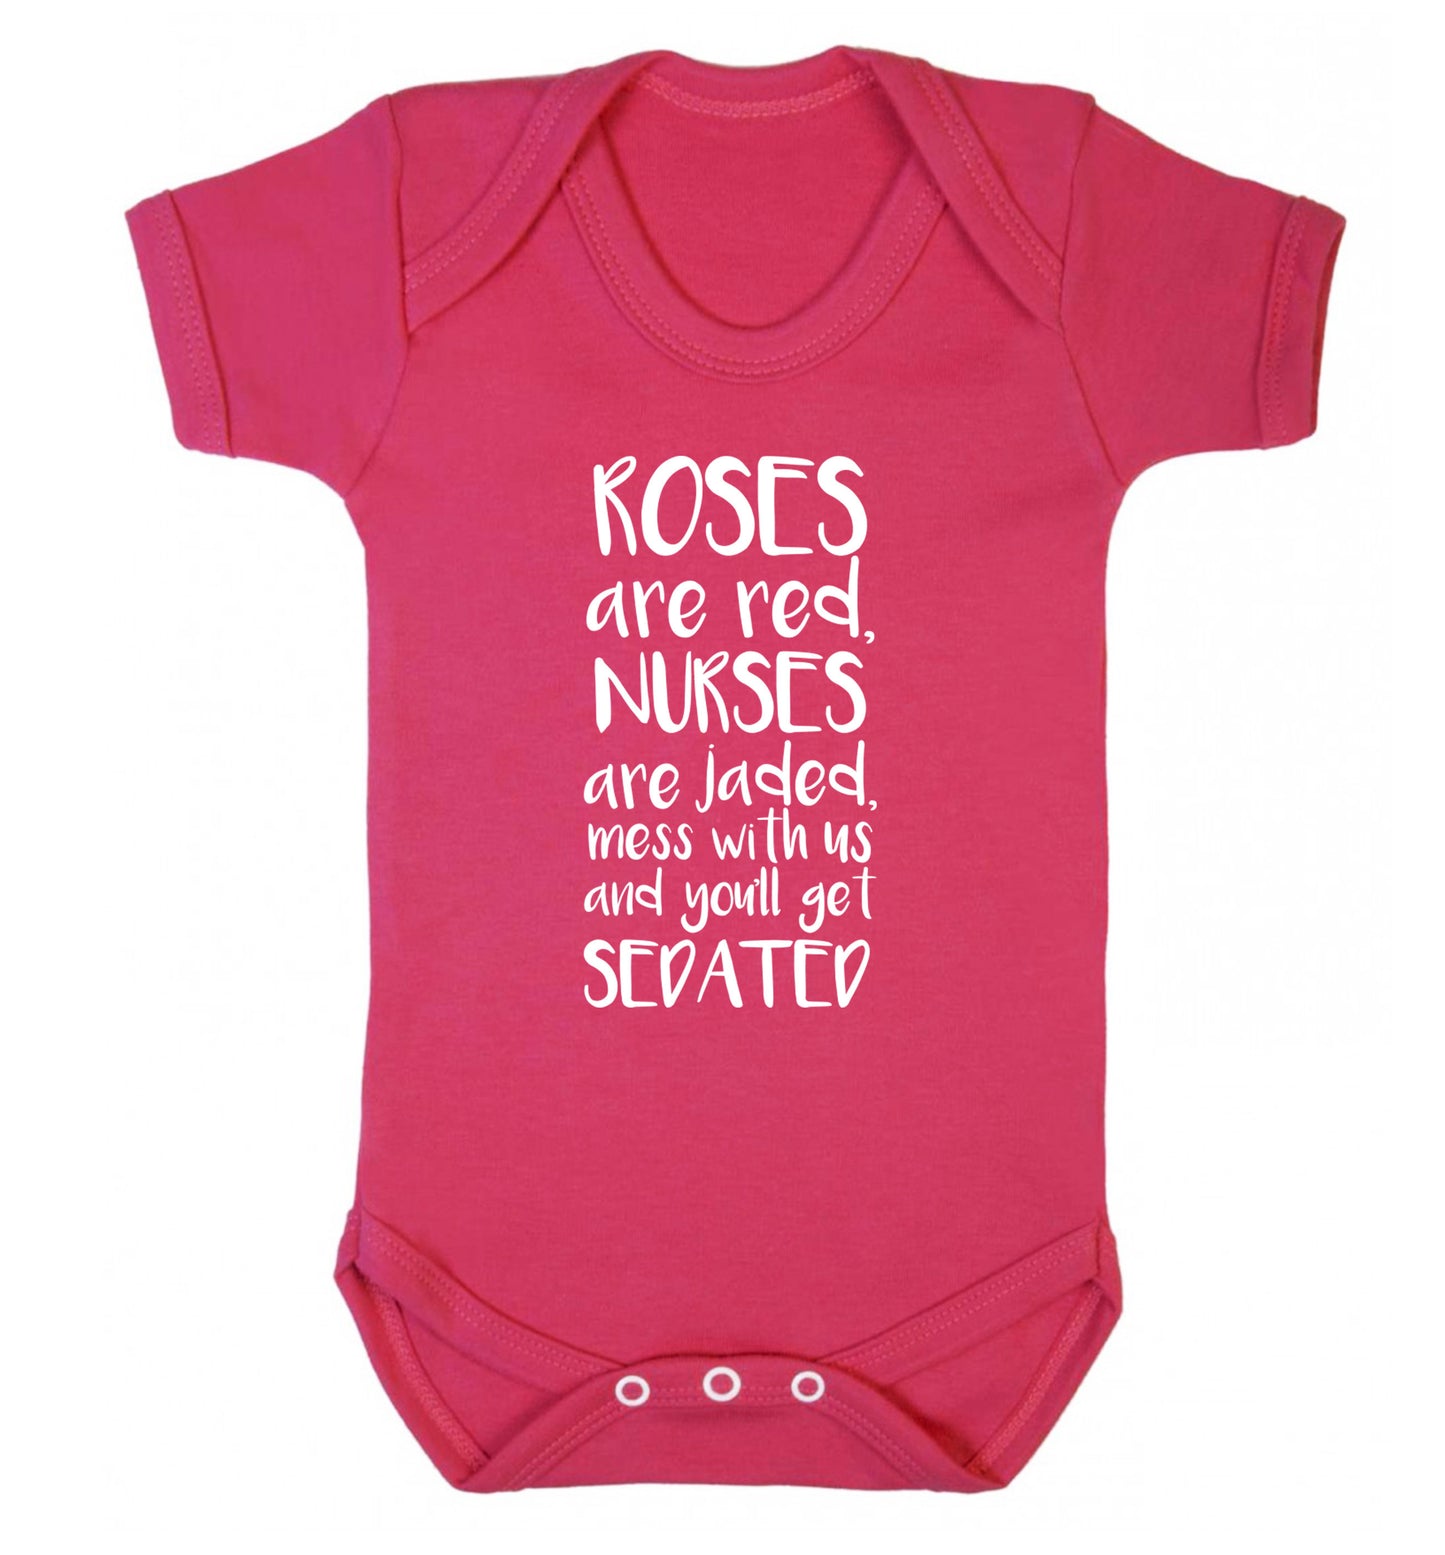 Roses are red, nurses are jaded, mess with us and you'll get sedated Baby Vest dark pink 18-24 months